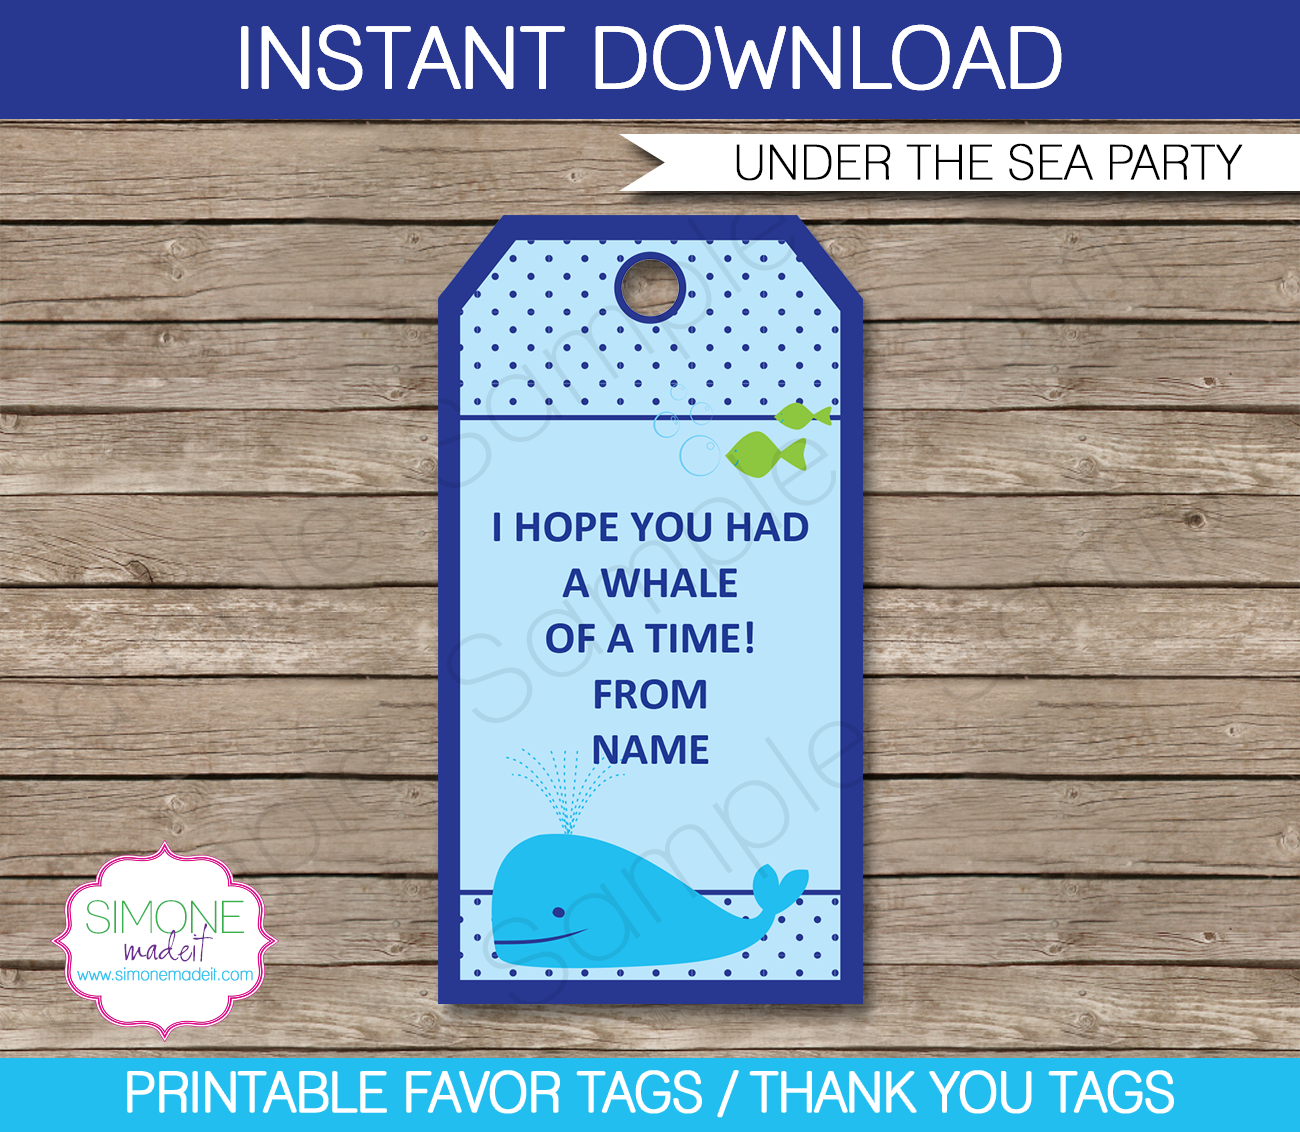 Under the Sea Party Favor Tags | Thank You Tags | Birthday Party | Editable DIY Template | $3.00 INSTANT DOWNLOAD via SIMONEmadeit.com